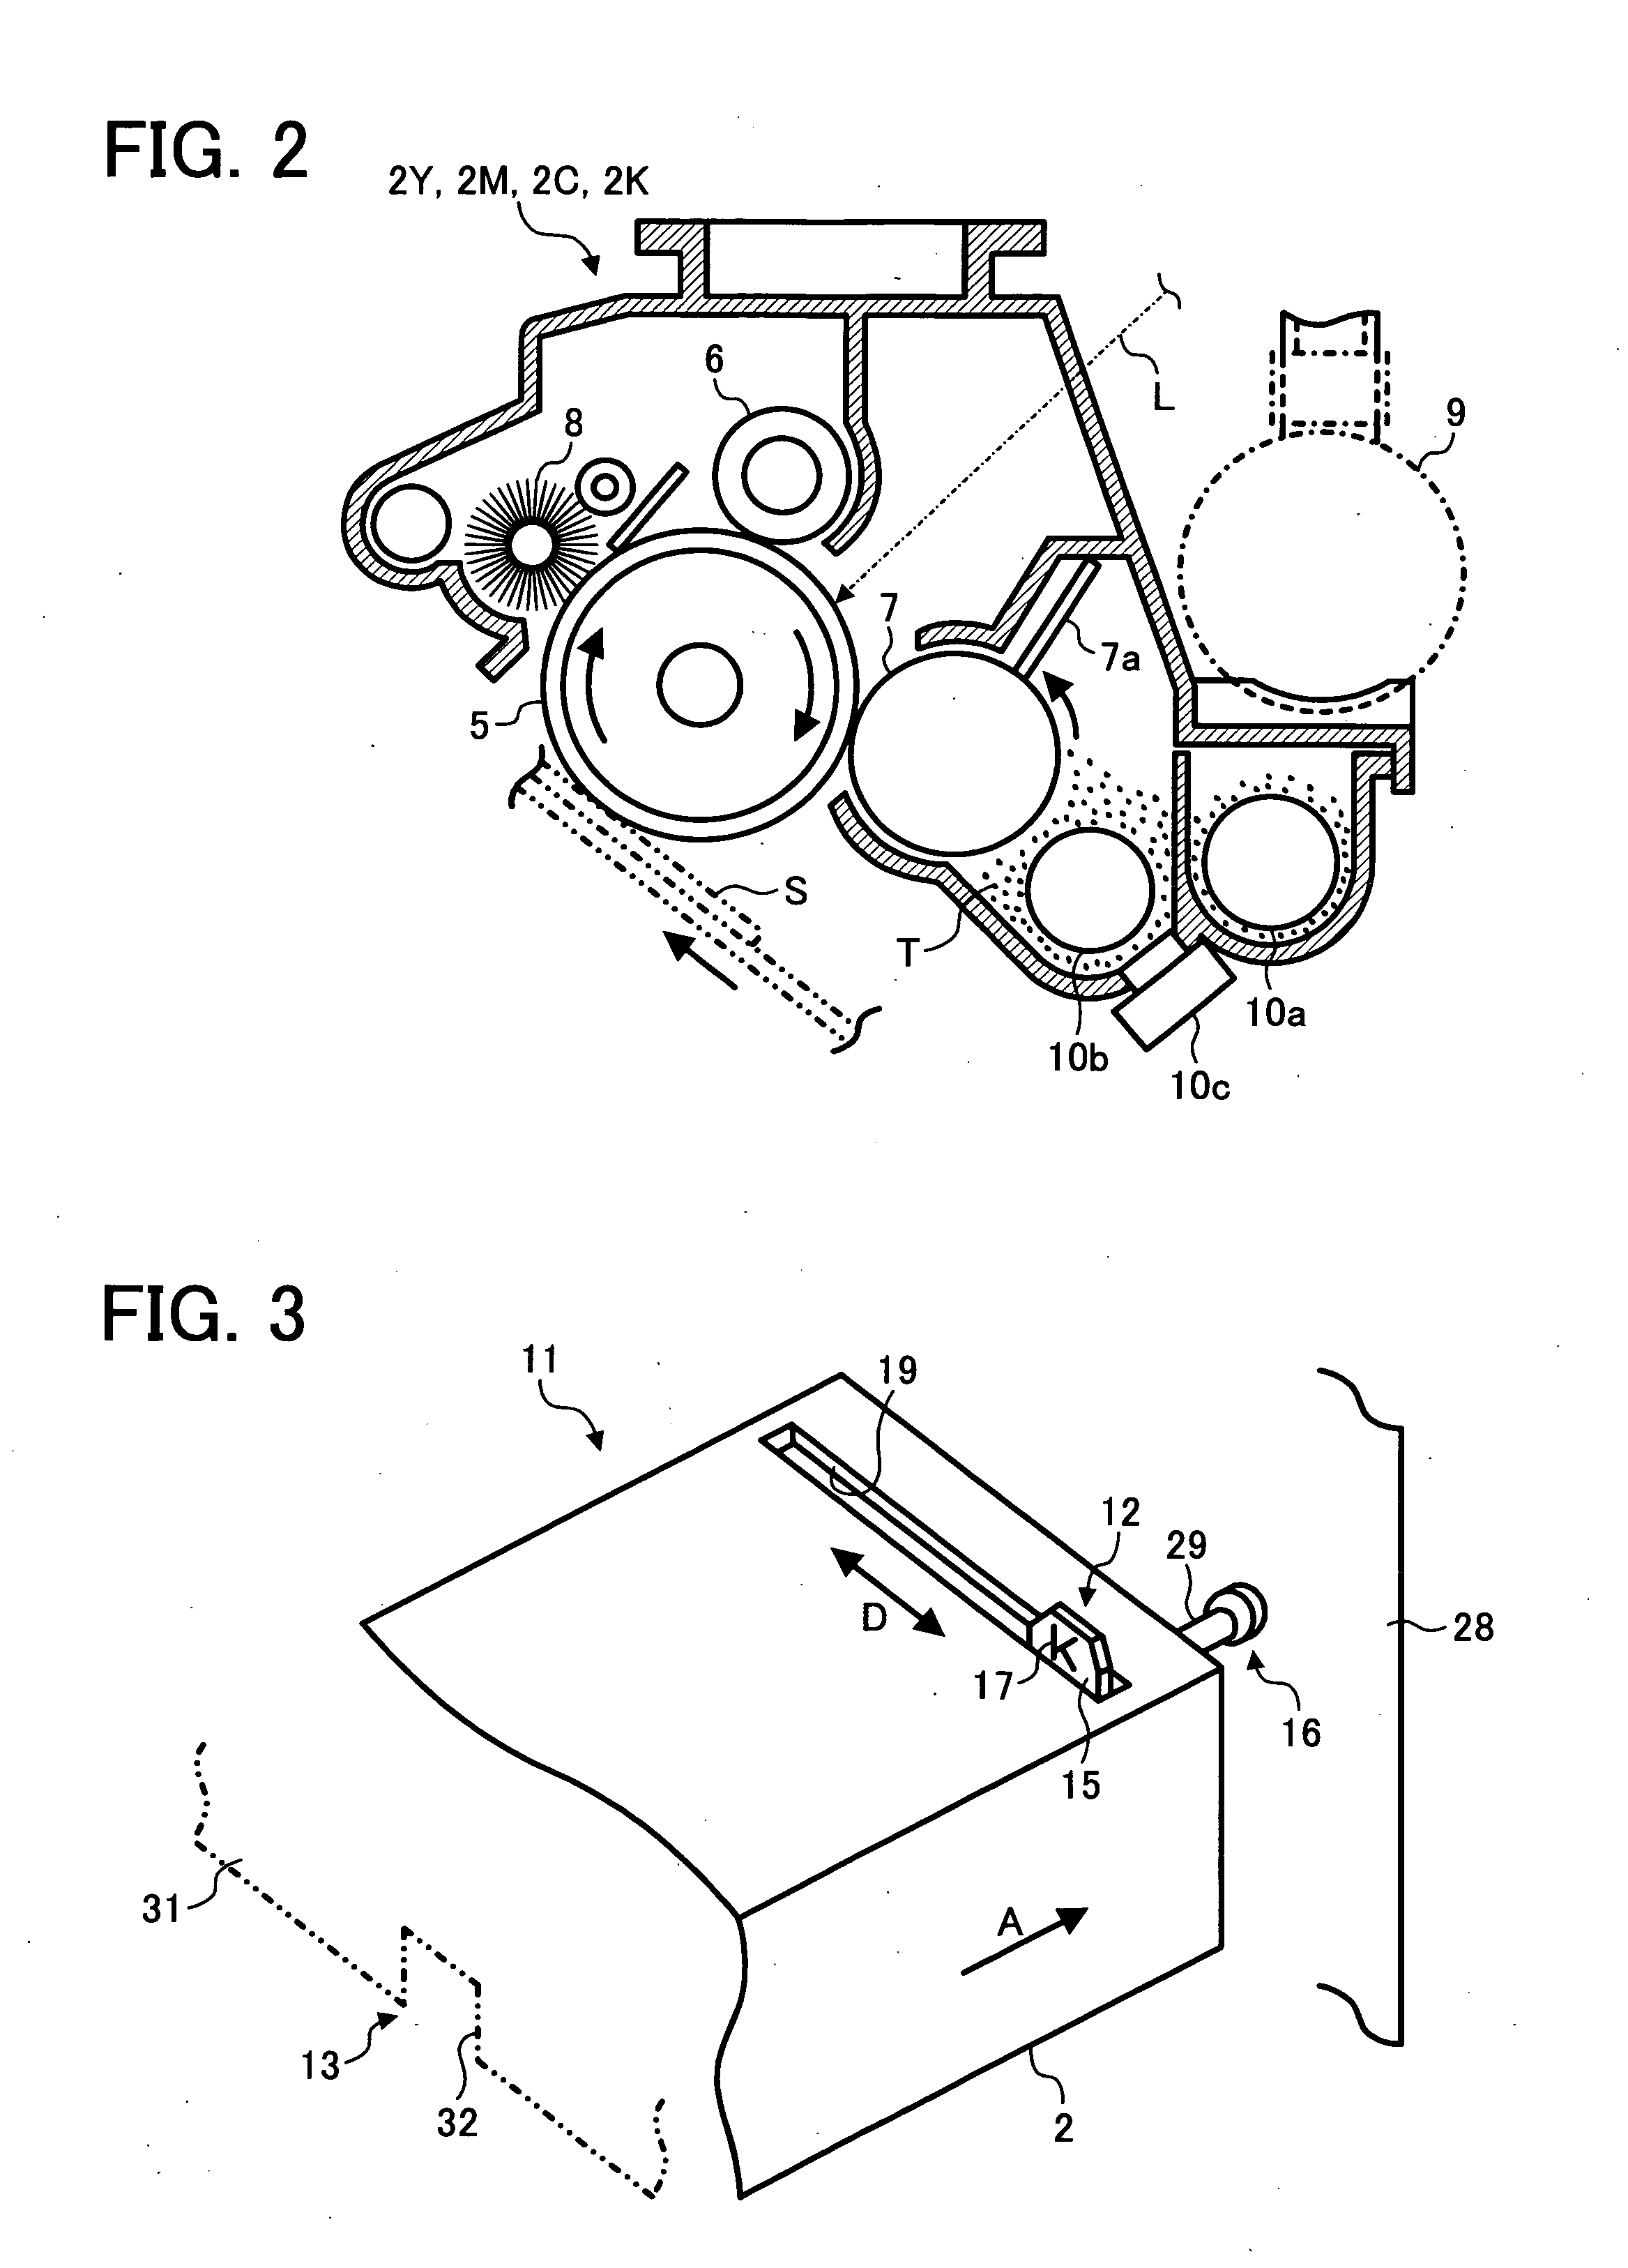 Apparatus and device unit for use in the apparatus